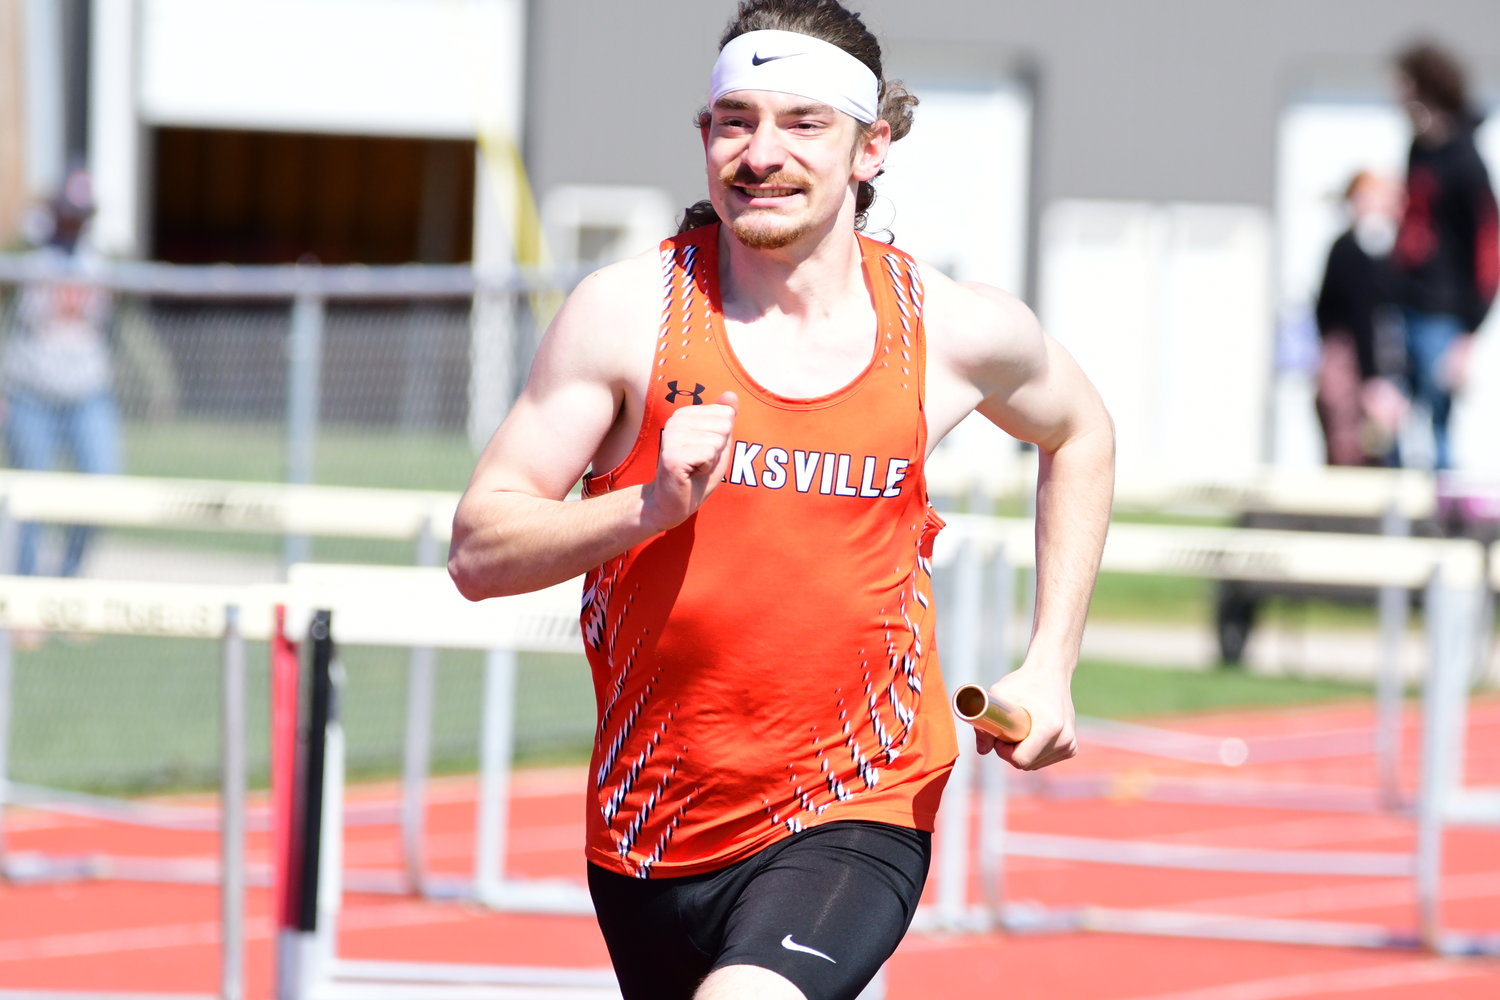 Photos from the 2022 edition of the Tiger Invitational track meet, held in Kirksville on April 14.